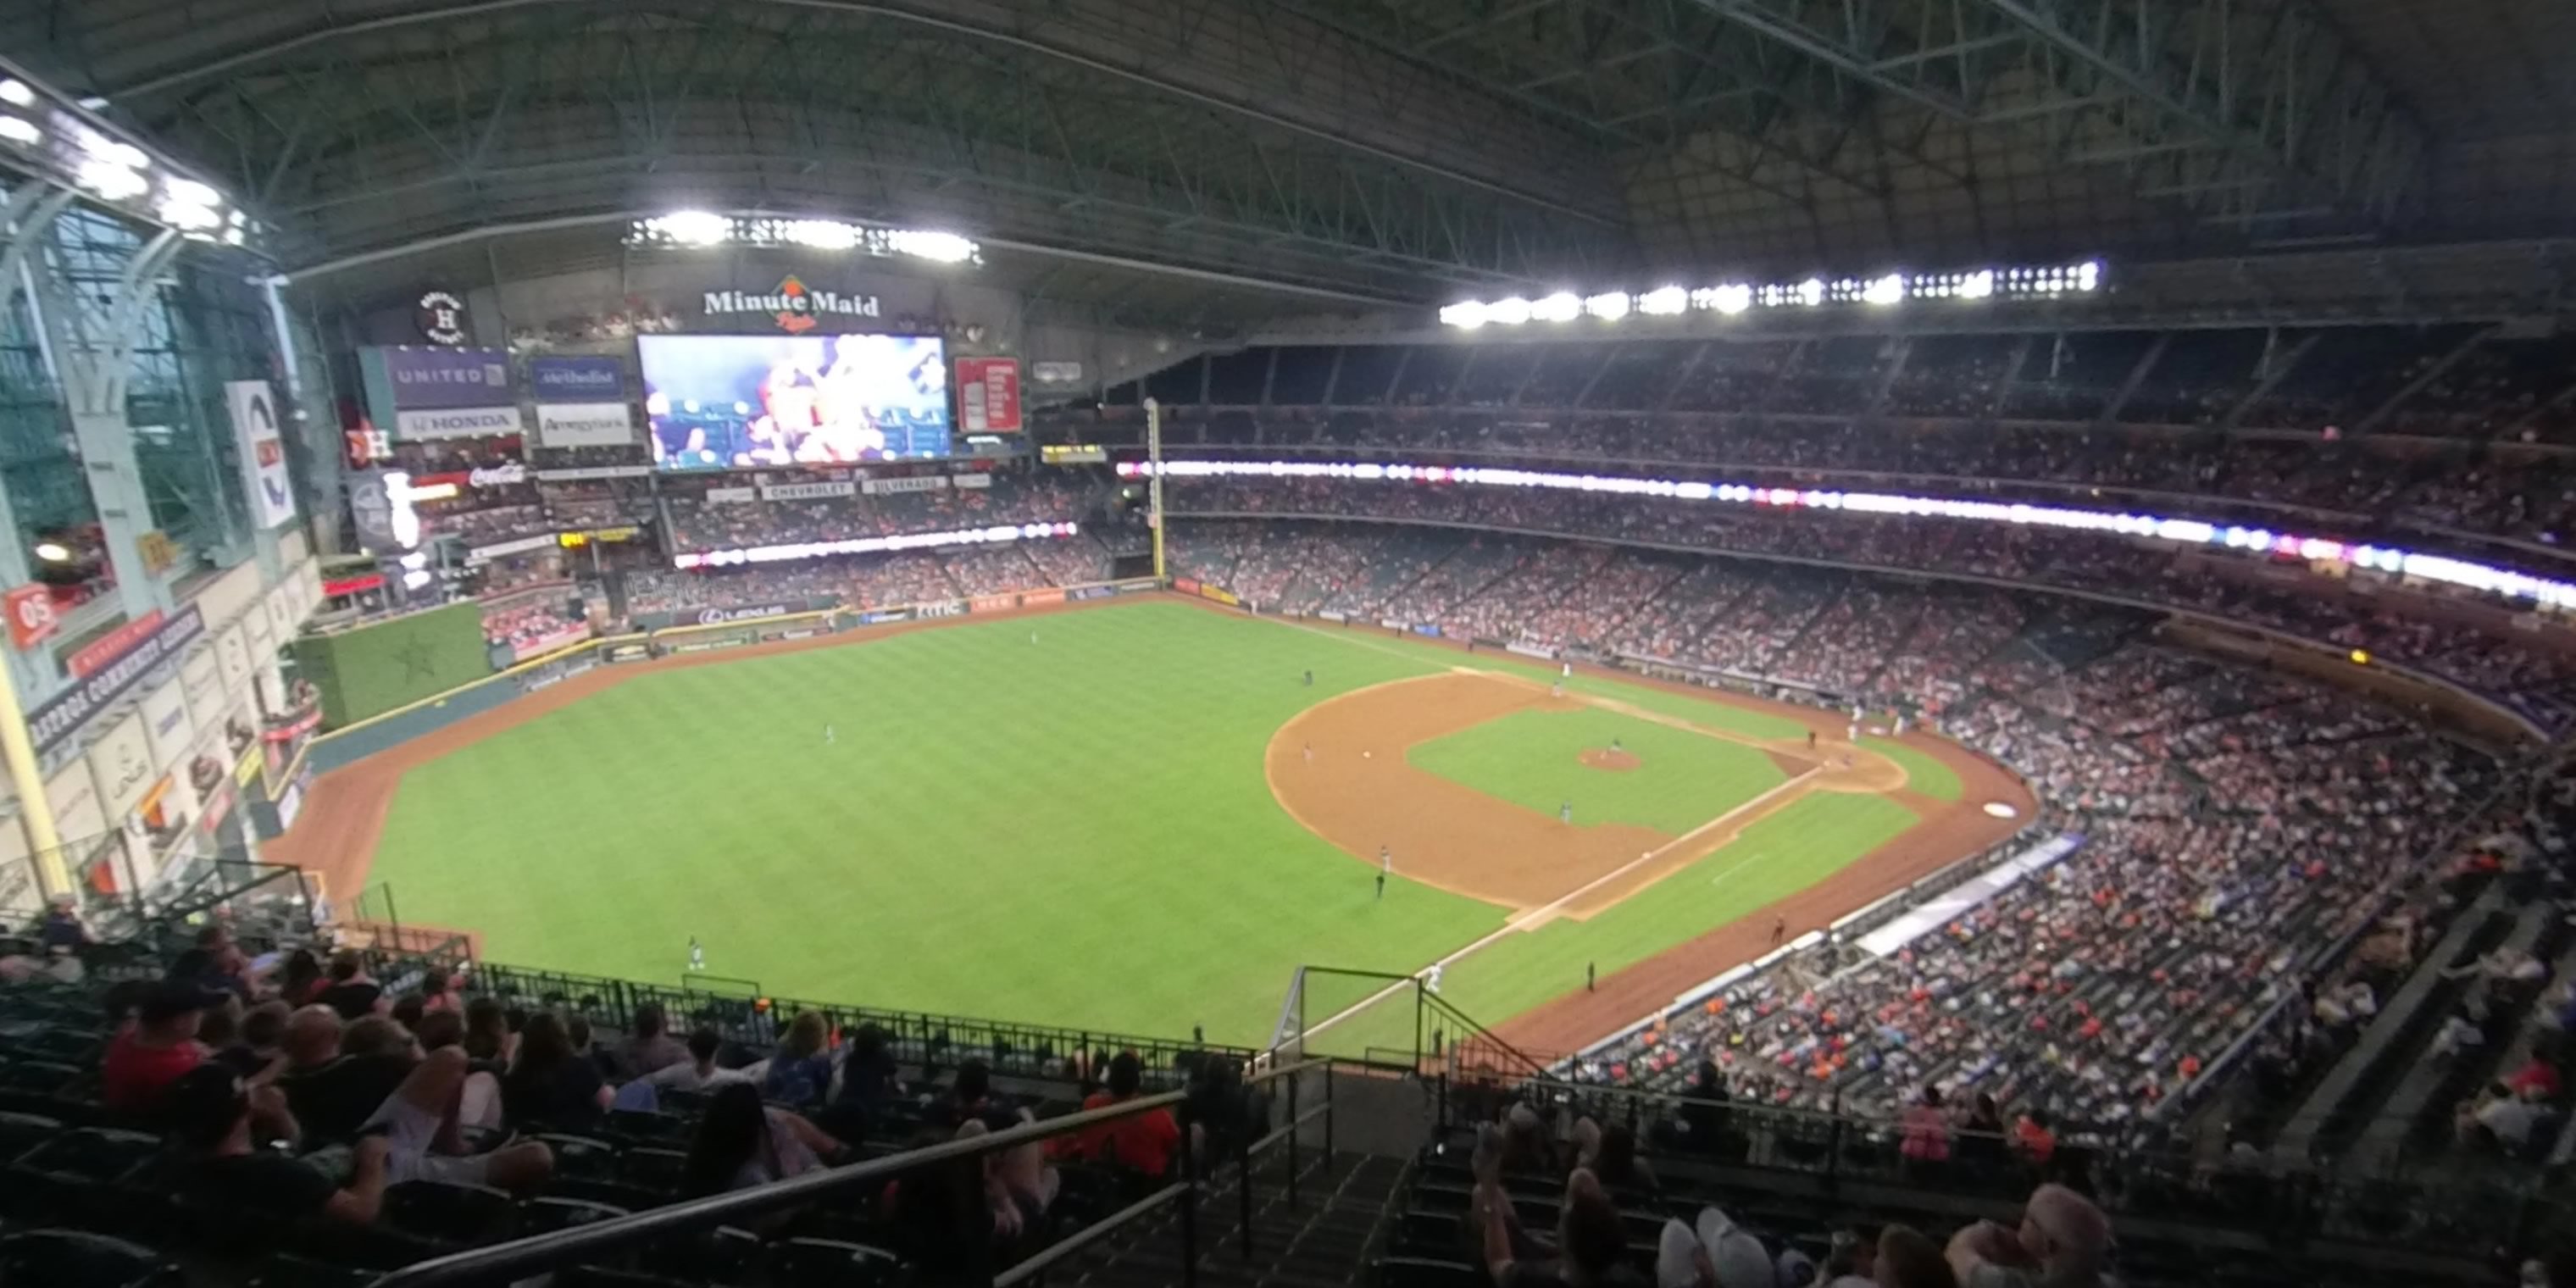 section 406 panoramic seat view  for baseball - minute maid park